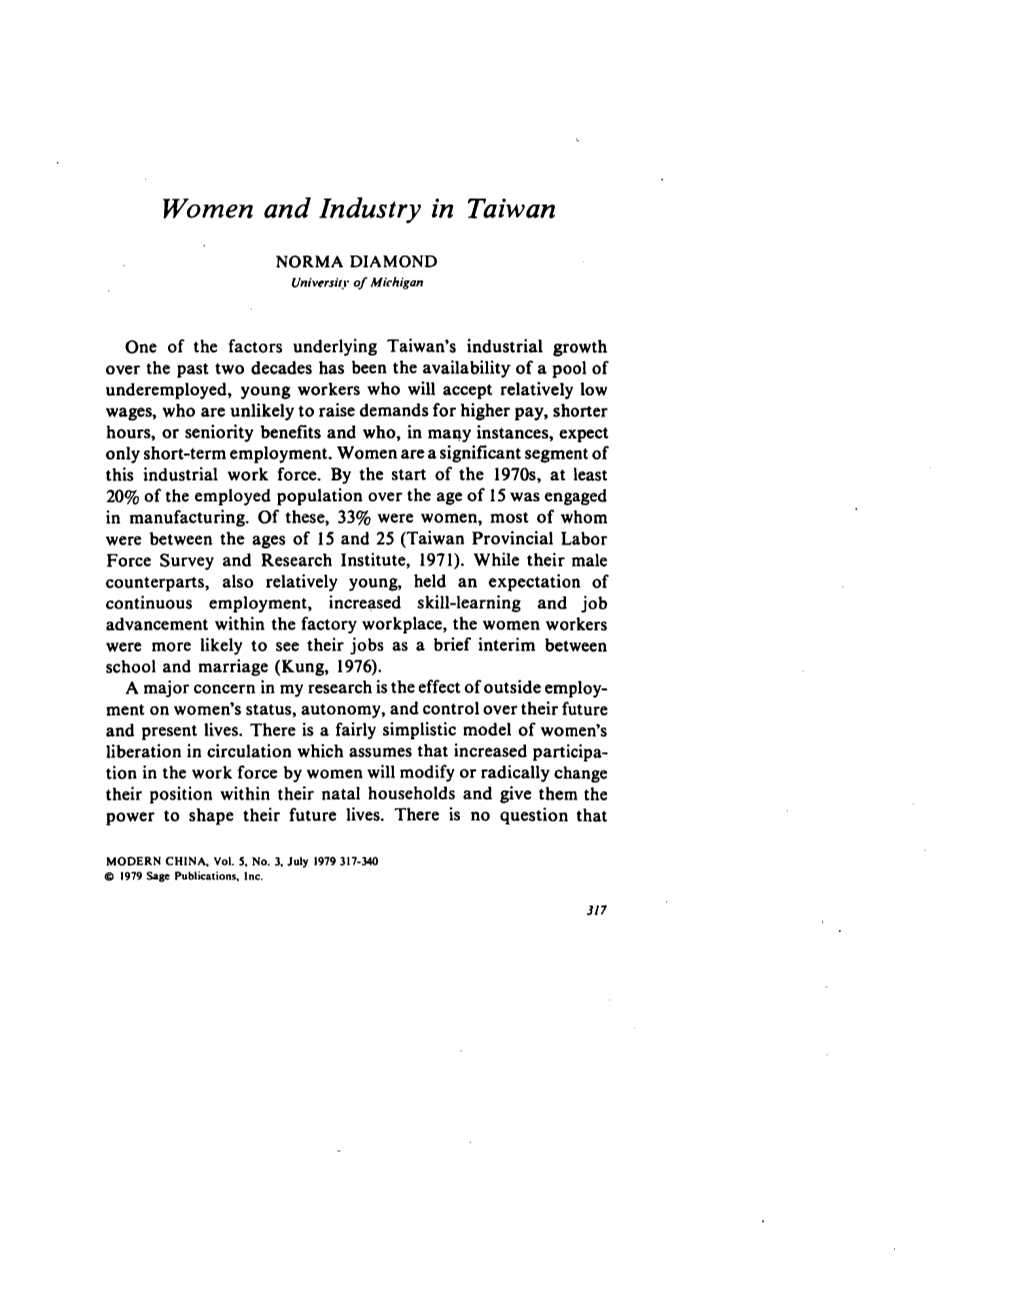 Women and Industry in Taiwan